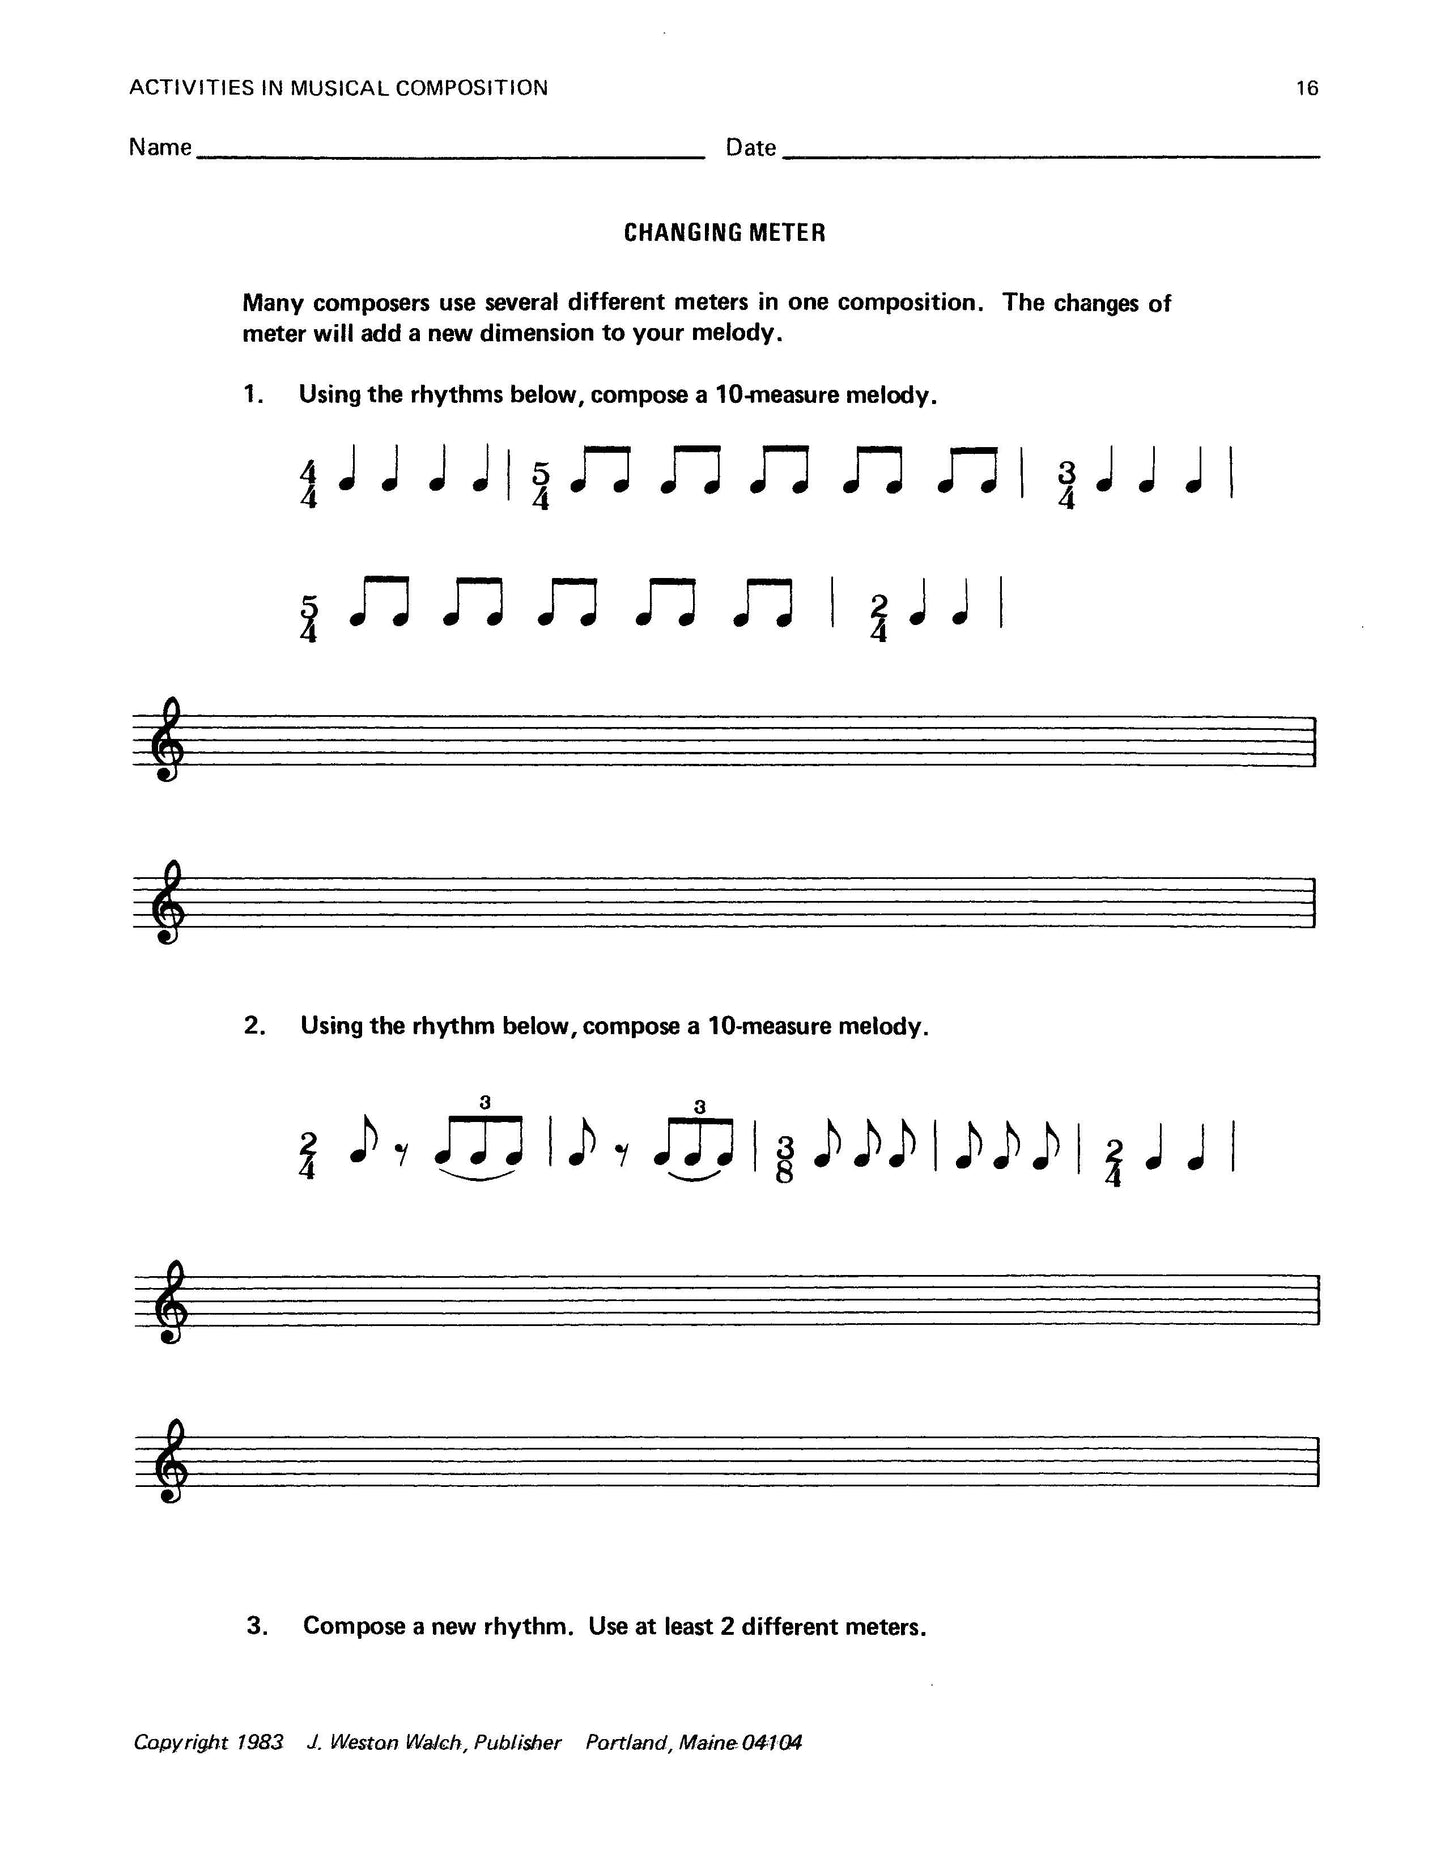 Bright Education Australia, Teacher Resources, Music, Book, Activities in Musical Composition 